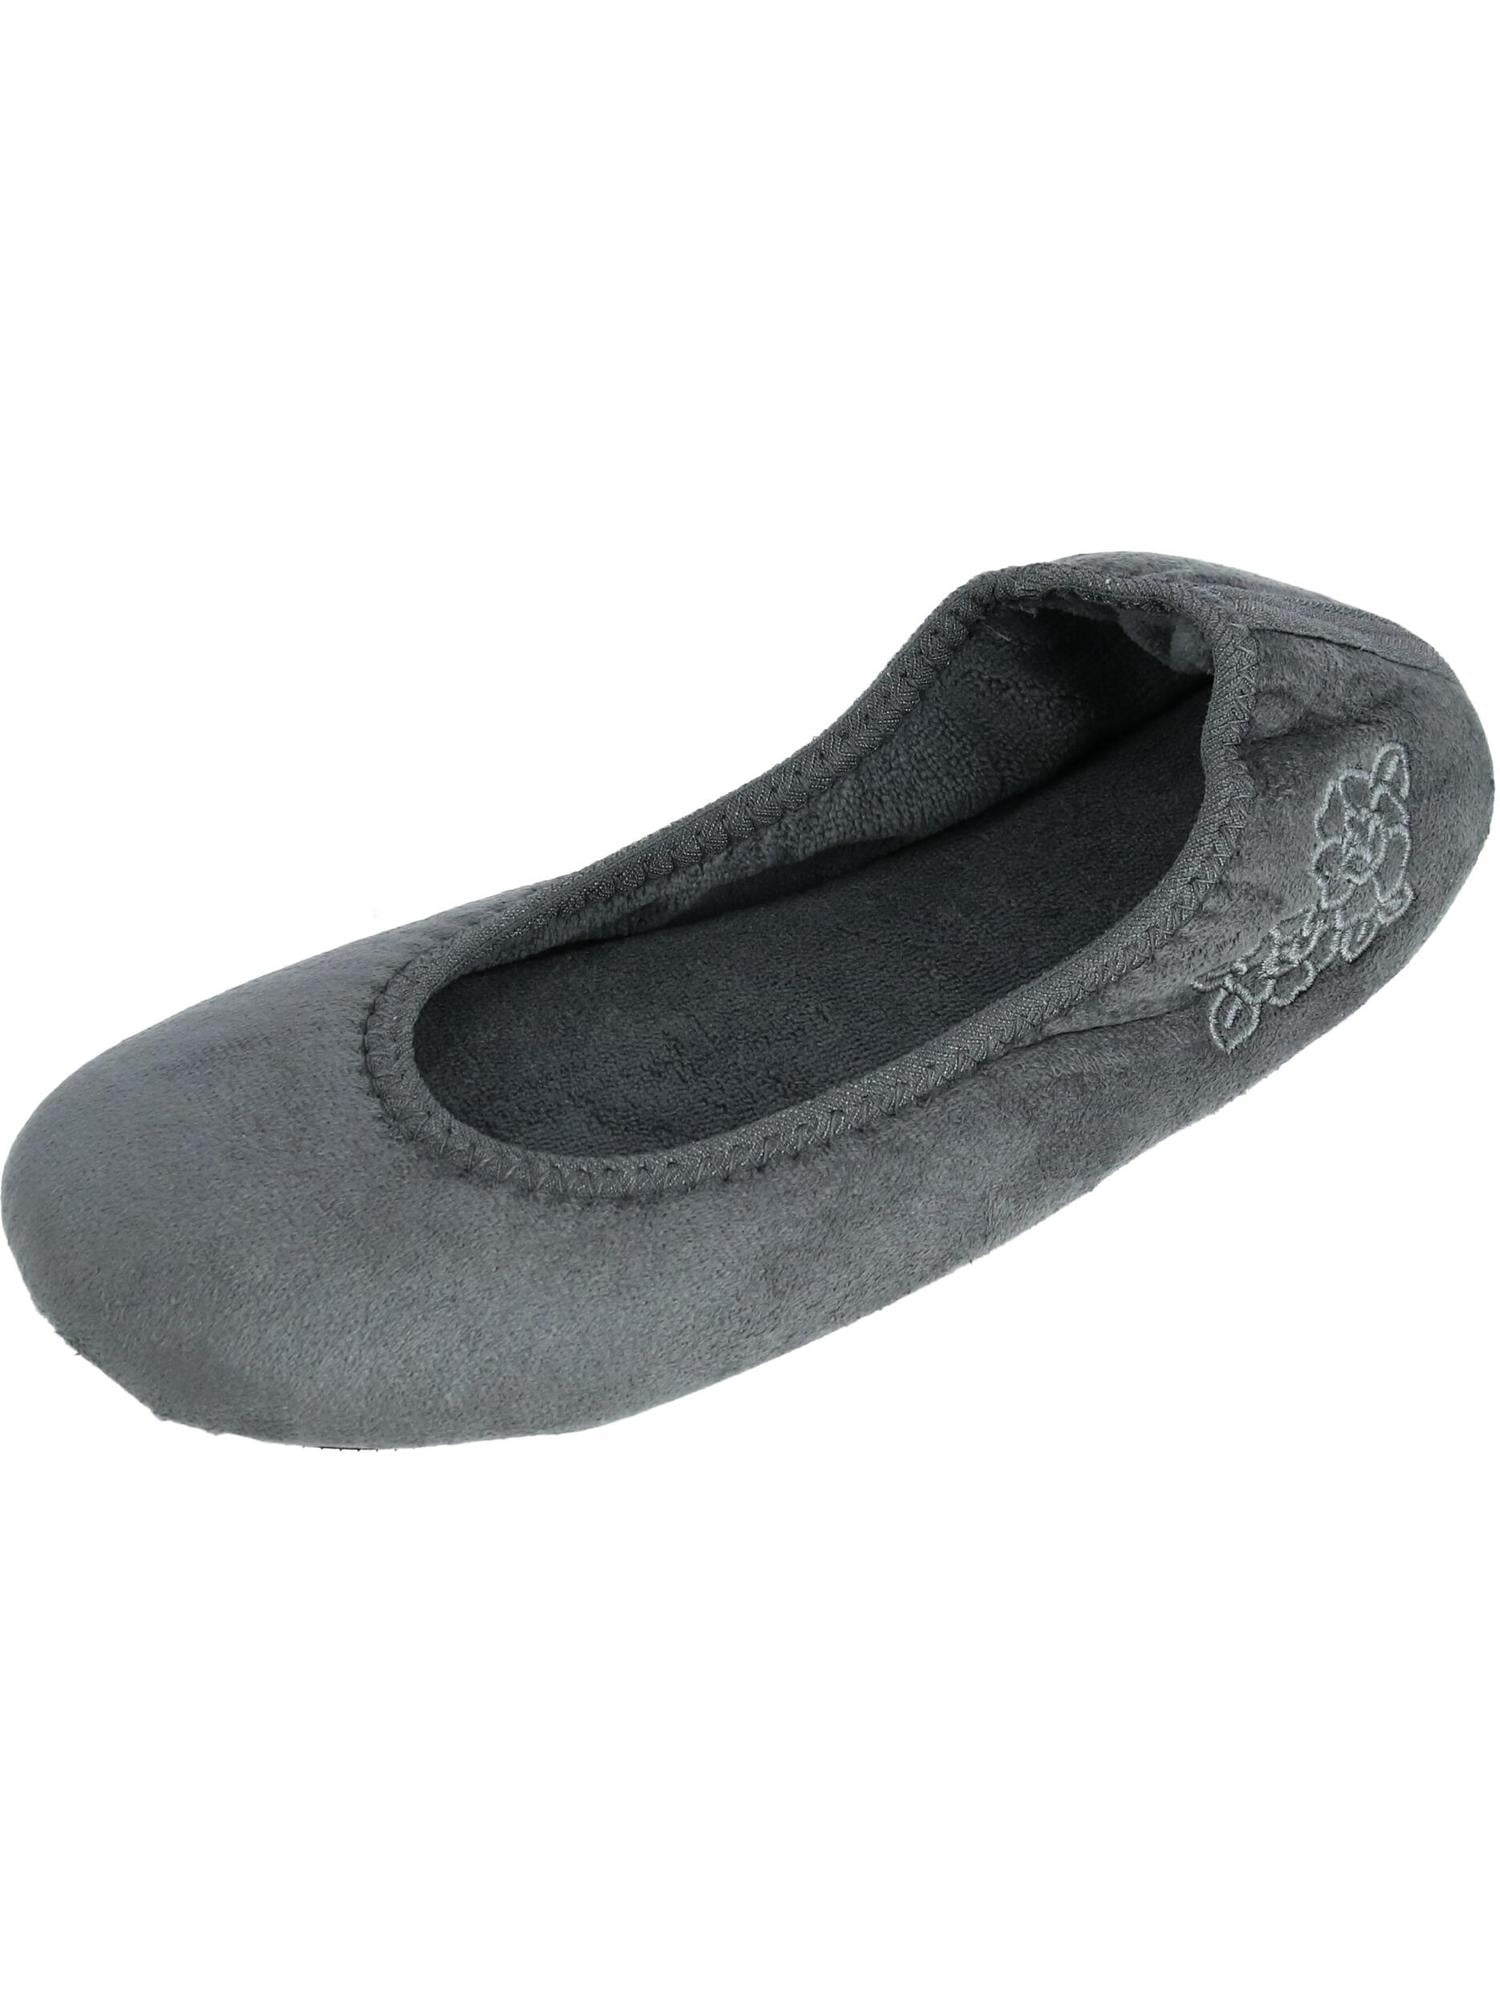 women's travel slippers with pouch